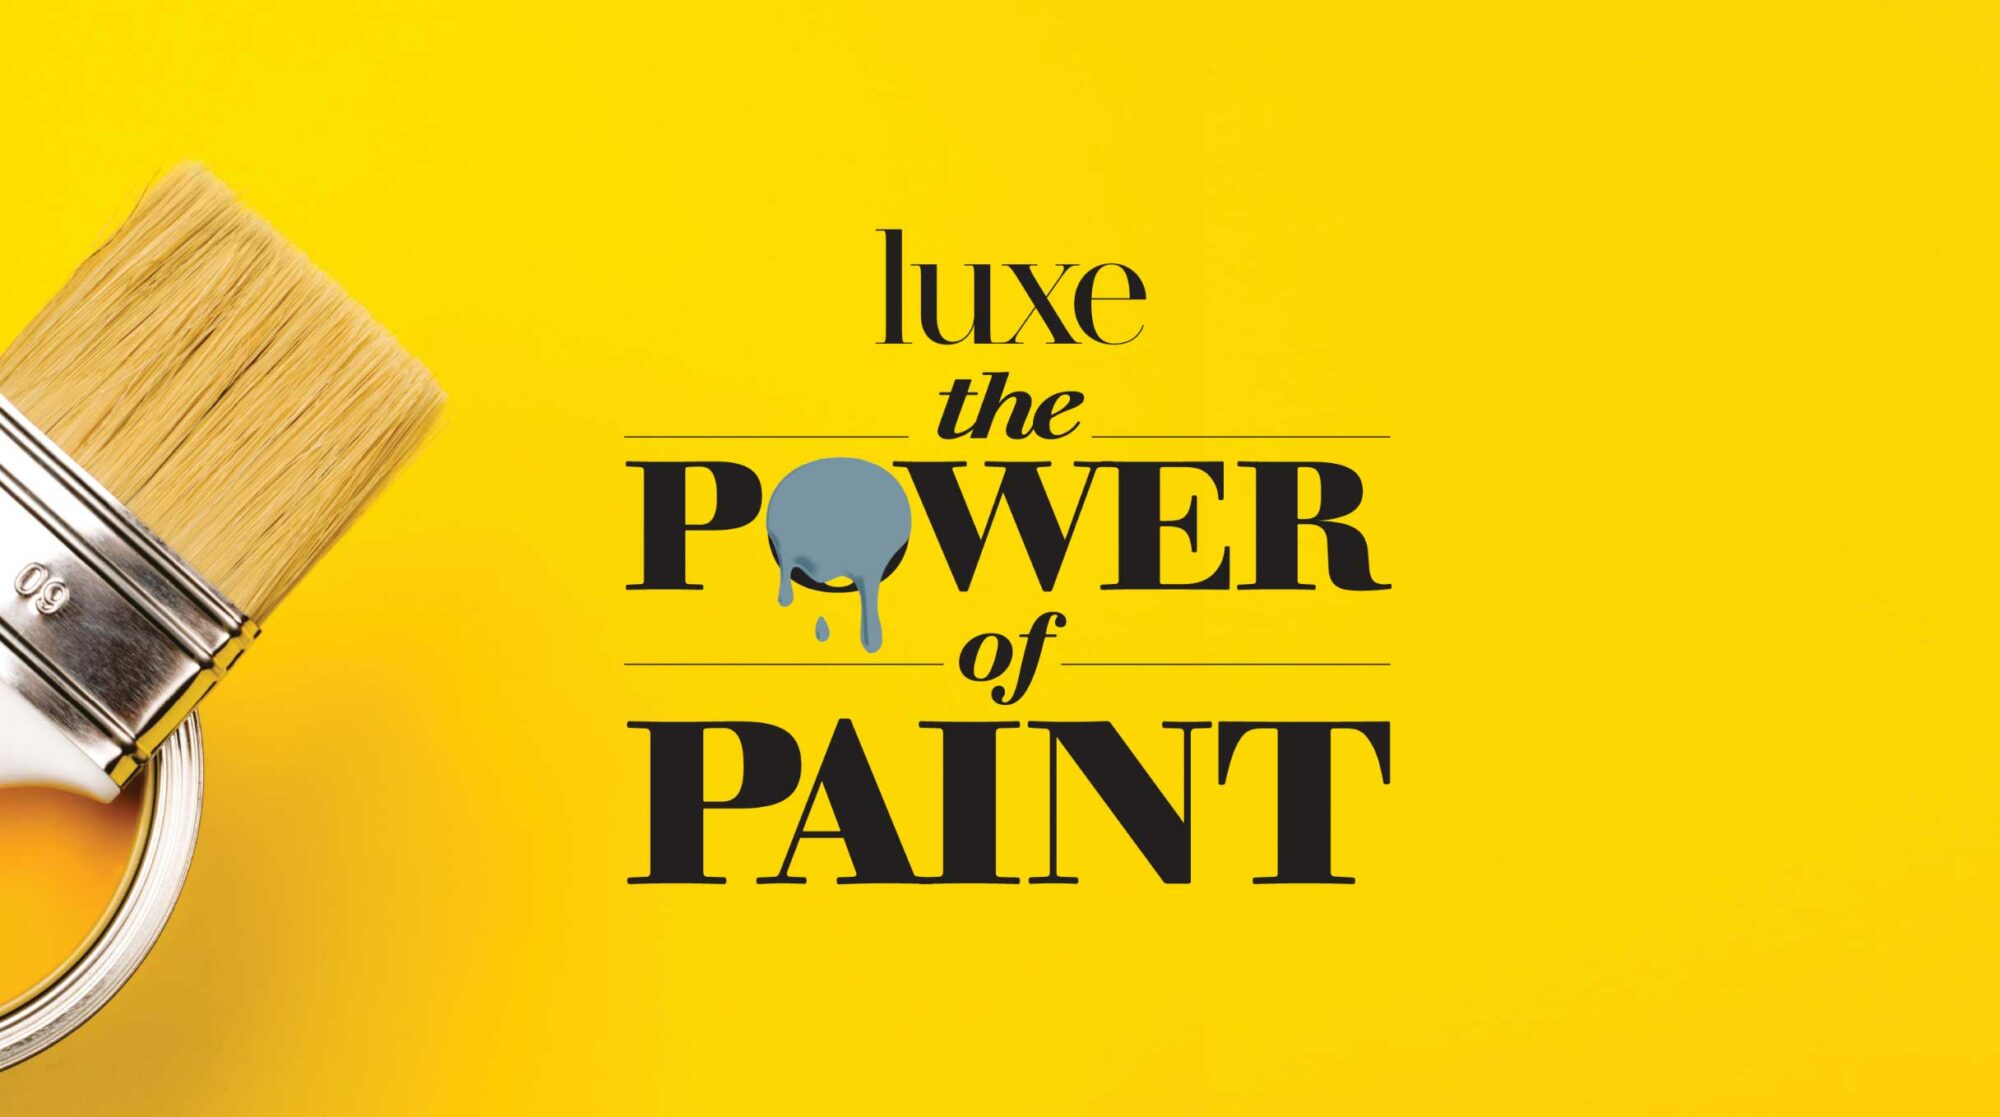 Power of Paint